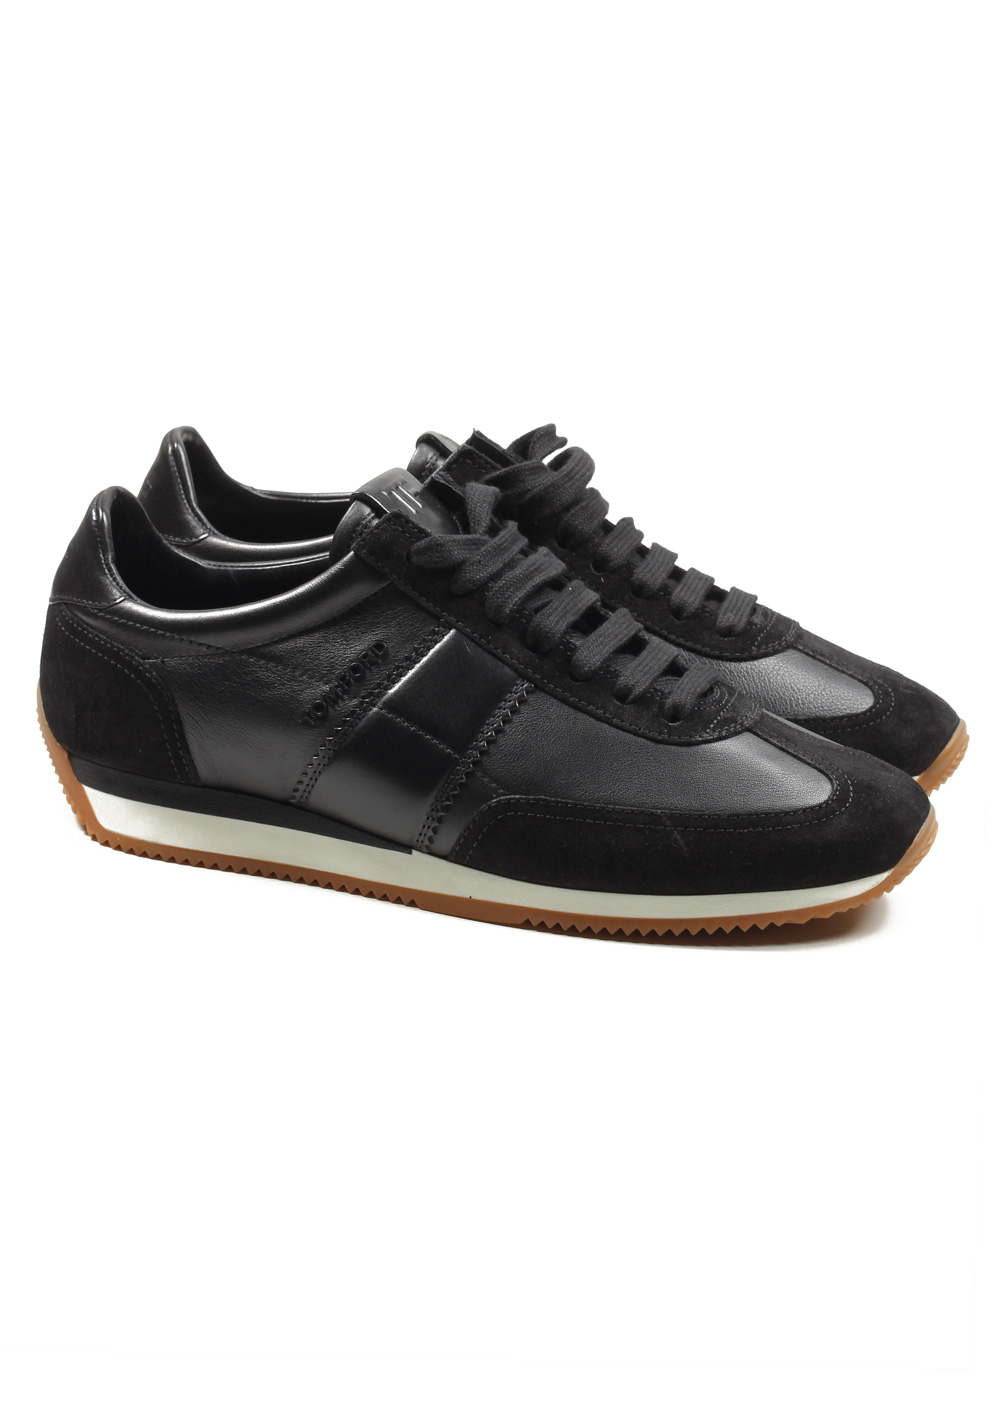 TOM FORD Orford Colorblock Suede Black Trainer Sneaker Shoes Size 7.5 UK / 8.5 U.S. | Costume Limité